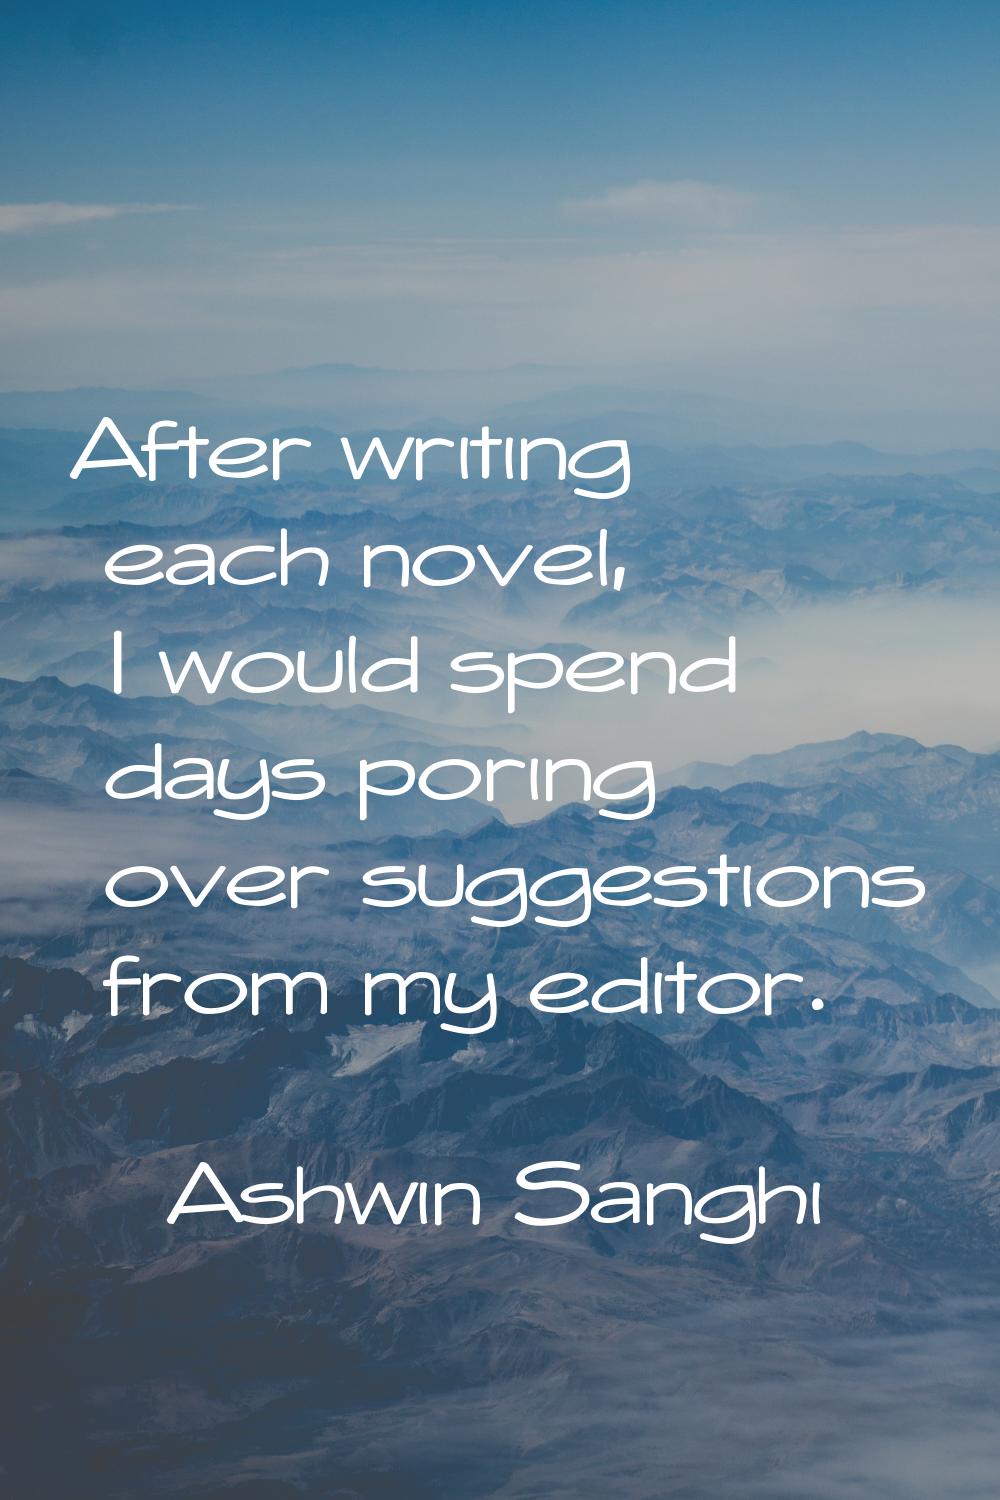 After writing each novel, I would spend days poring over suggestions from my editor.